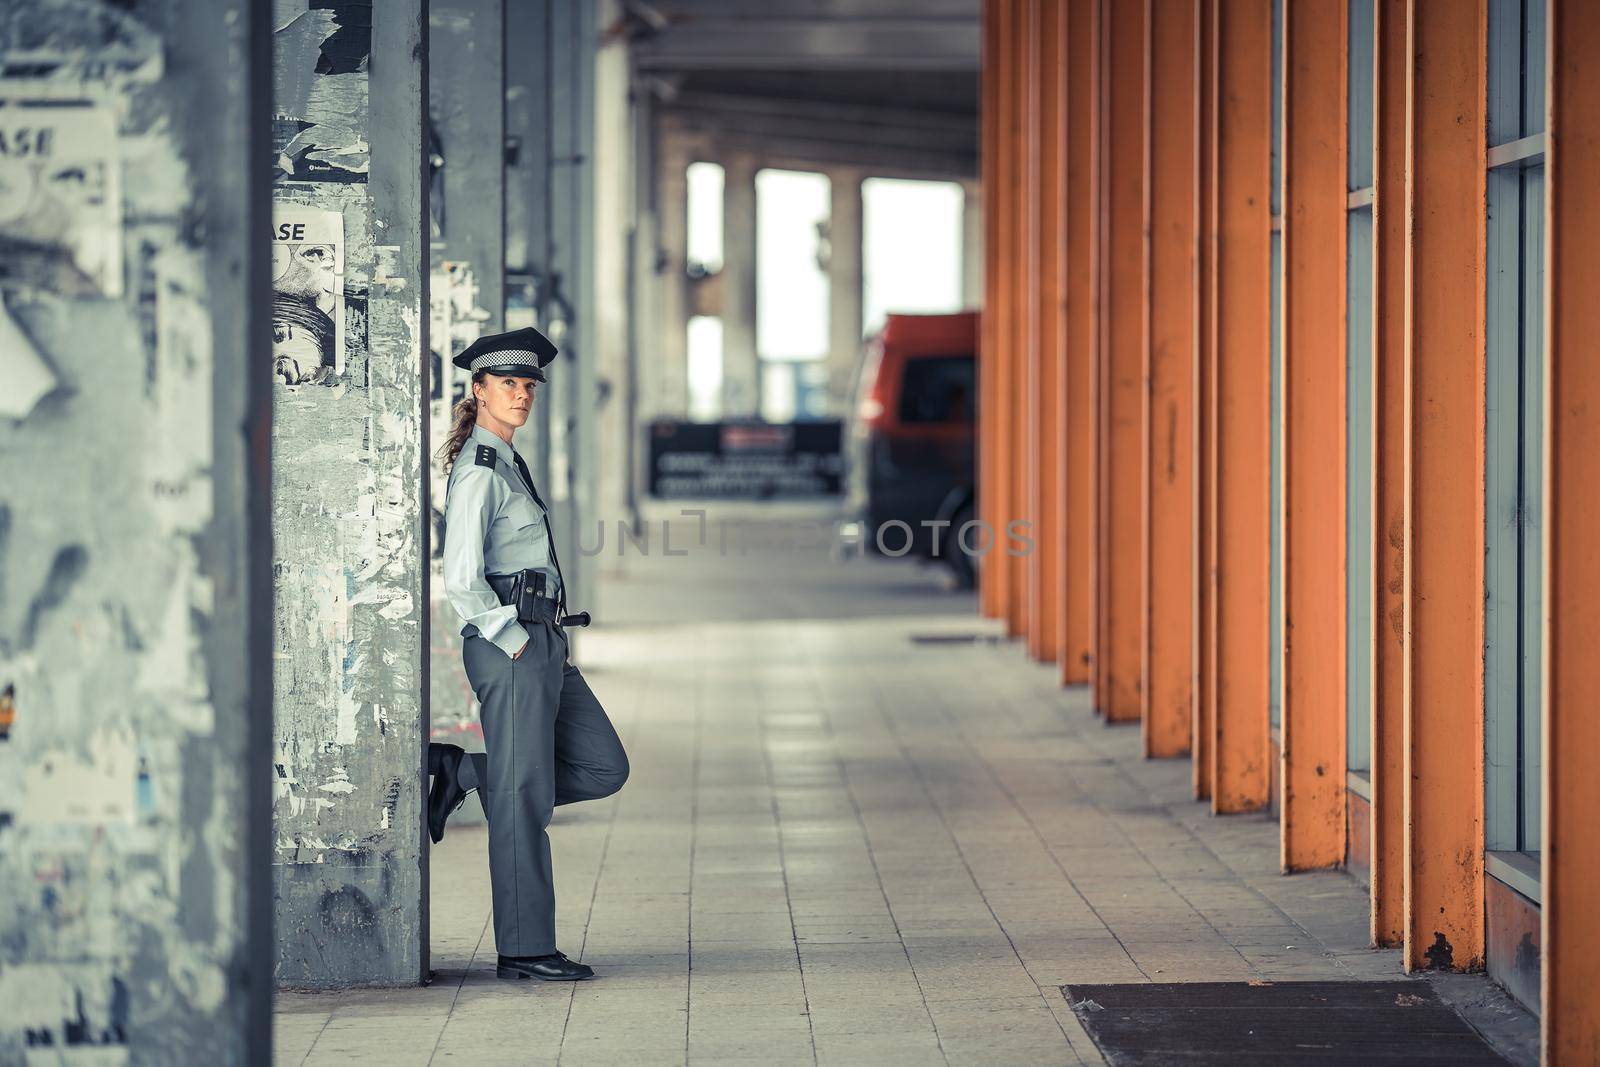 policewoman in uniform walking around the city district by Edophoto